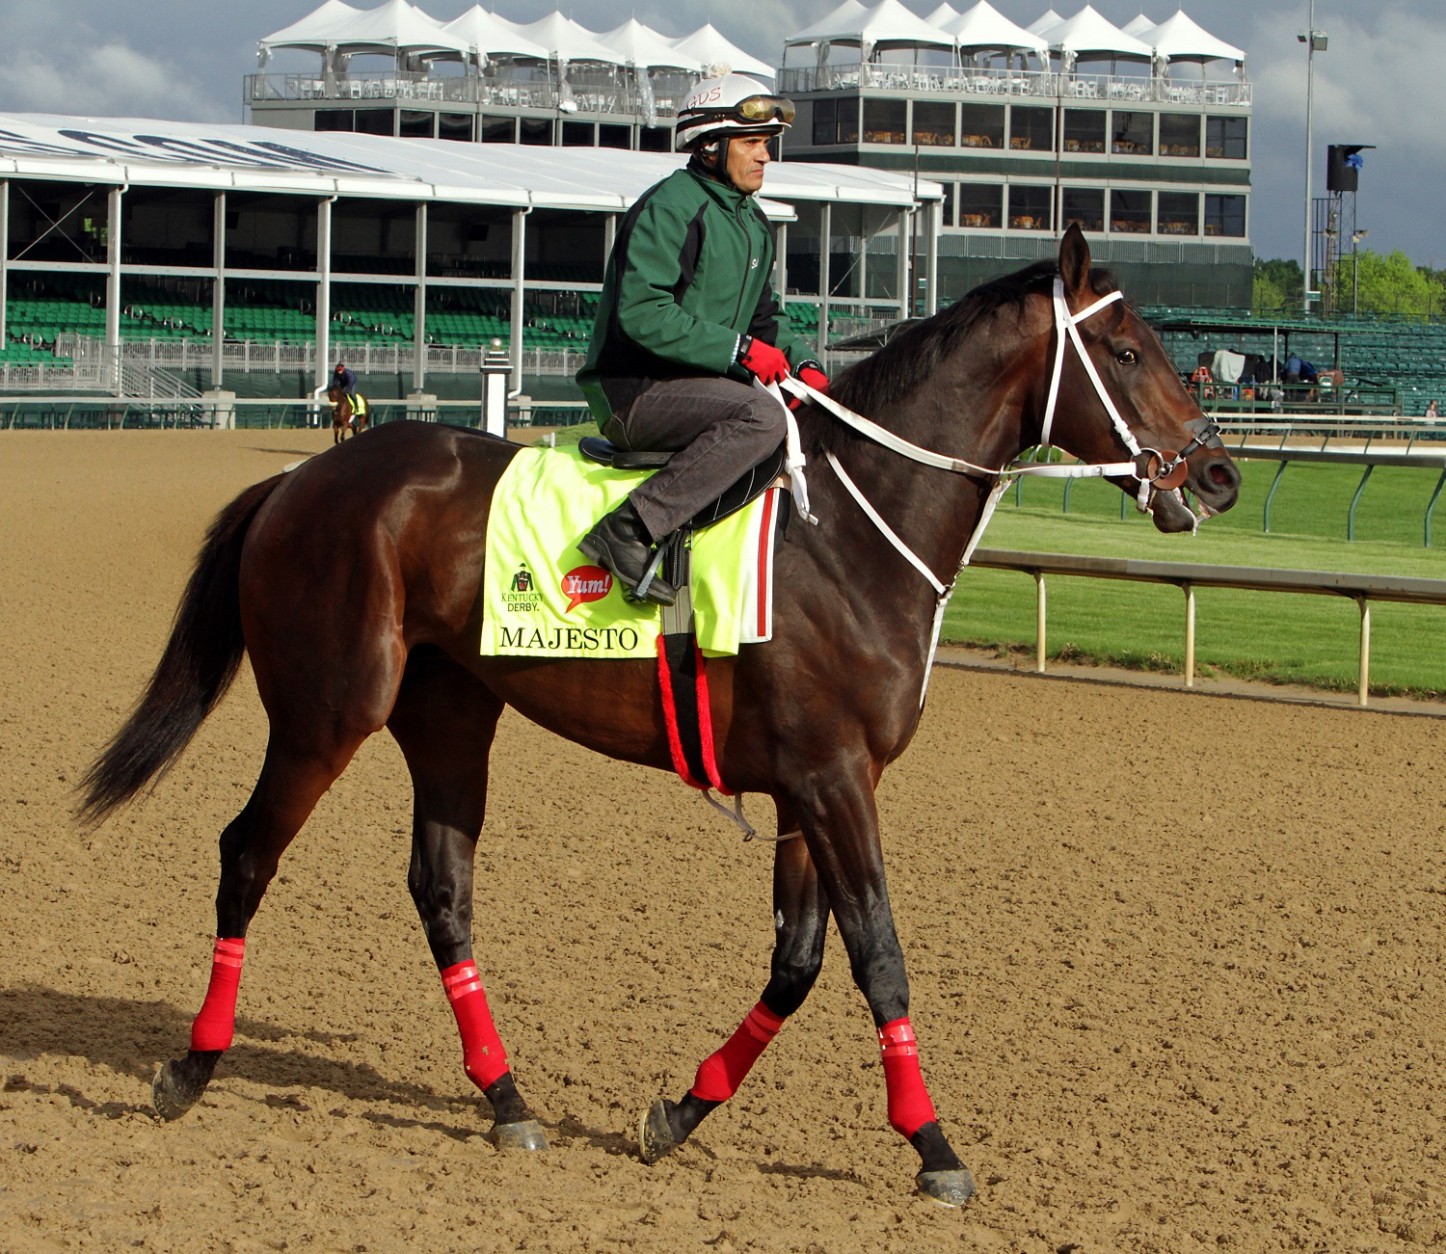 Kentucky Derby entrant Majesto, ridden by exercise rider J.J. Delgado,       walks at Churchill Downs in Louisville, Ky., Thursday, May 5,   2016. The 142nd Kentucky Derby is Saturday, May 7. (AP Photo/Garry Jones)